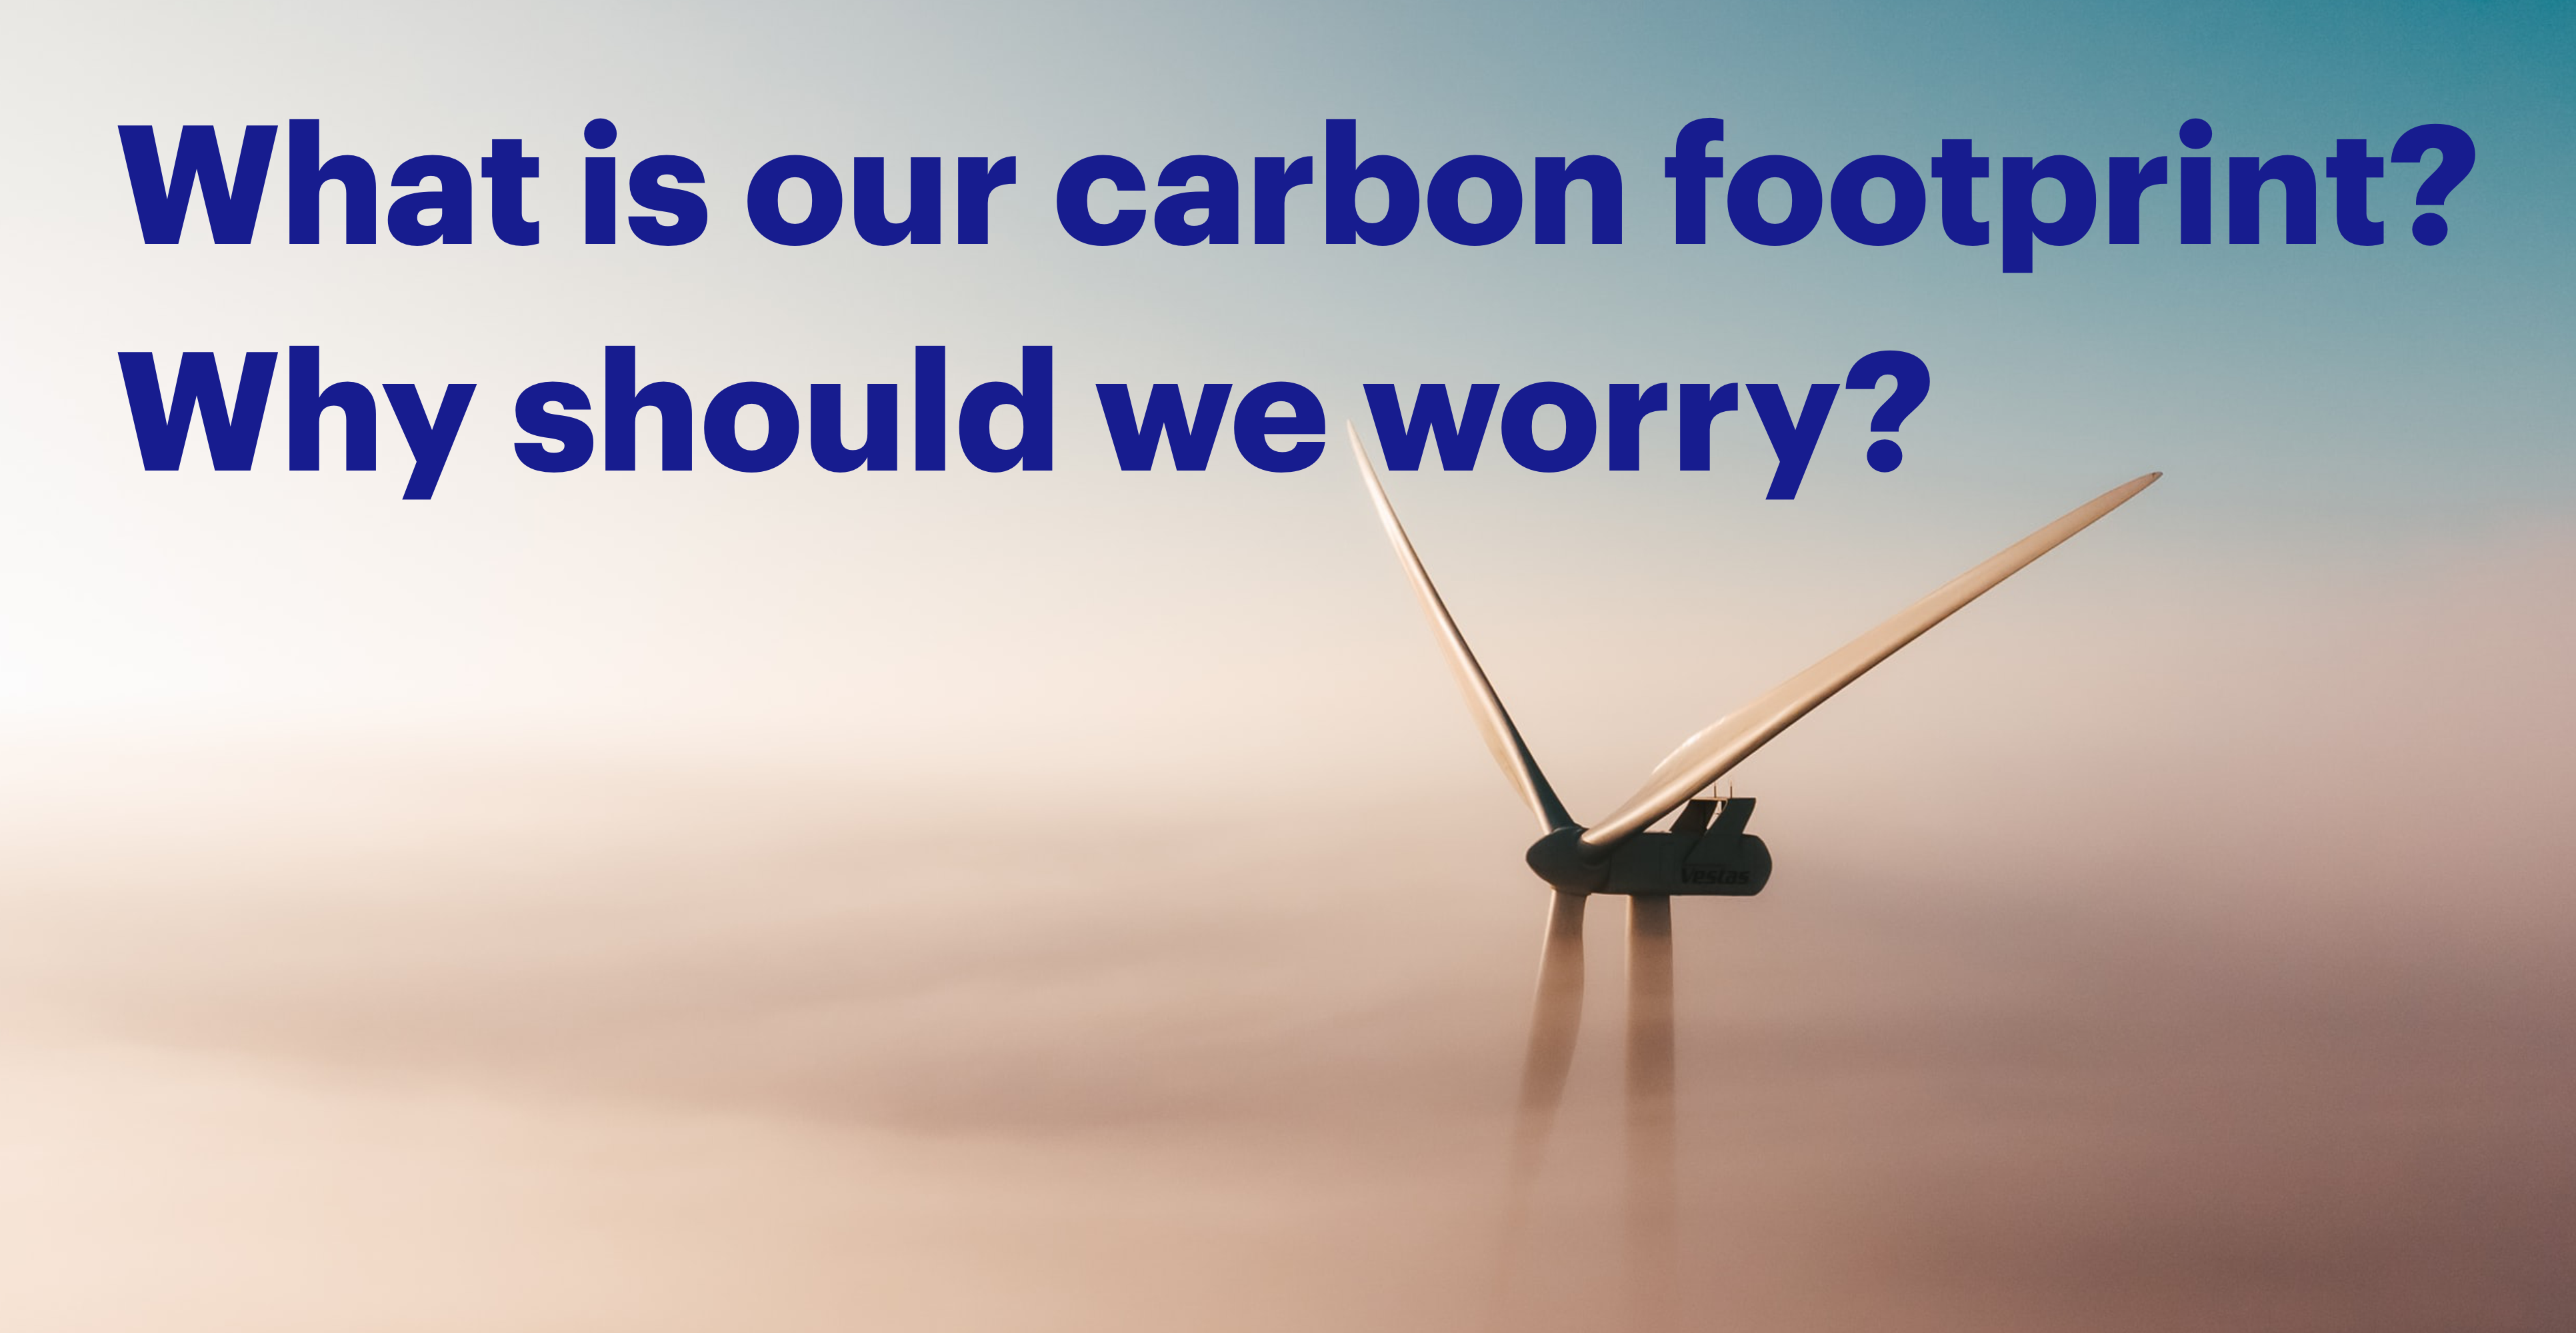 We have all heard about our carbon footprints, but what are they really?